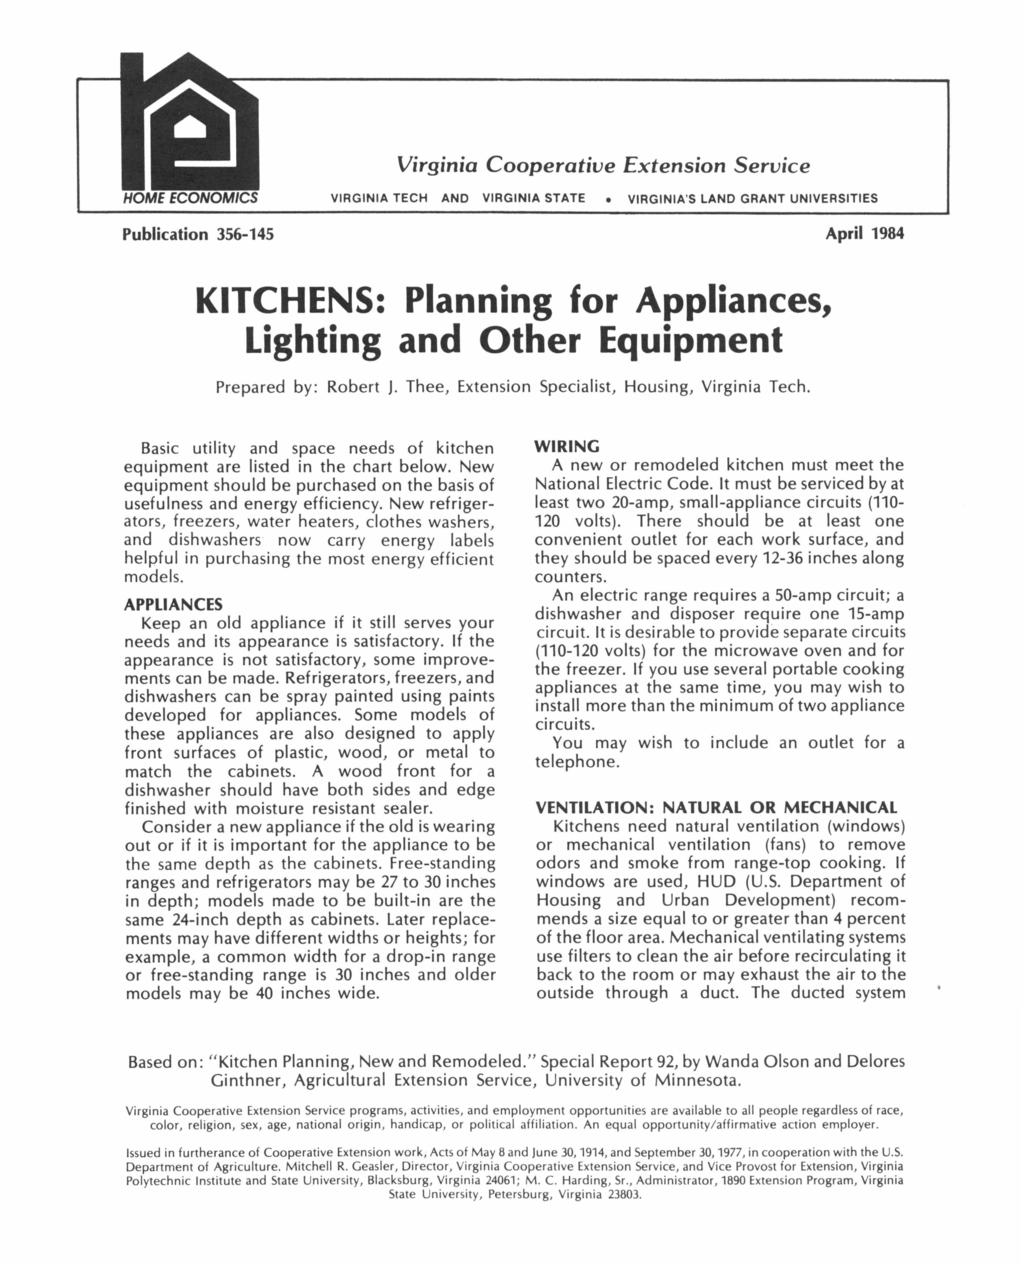 Virginia Cooperative Extension Service VIRGINIA TECH ANO VIRGINIA STATE VIRGINIA'S LANO GRANT UNIVERSITIES Publication 356-145 April 1984 KITCHENS: Planning for Appliances, Lighting and Other